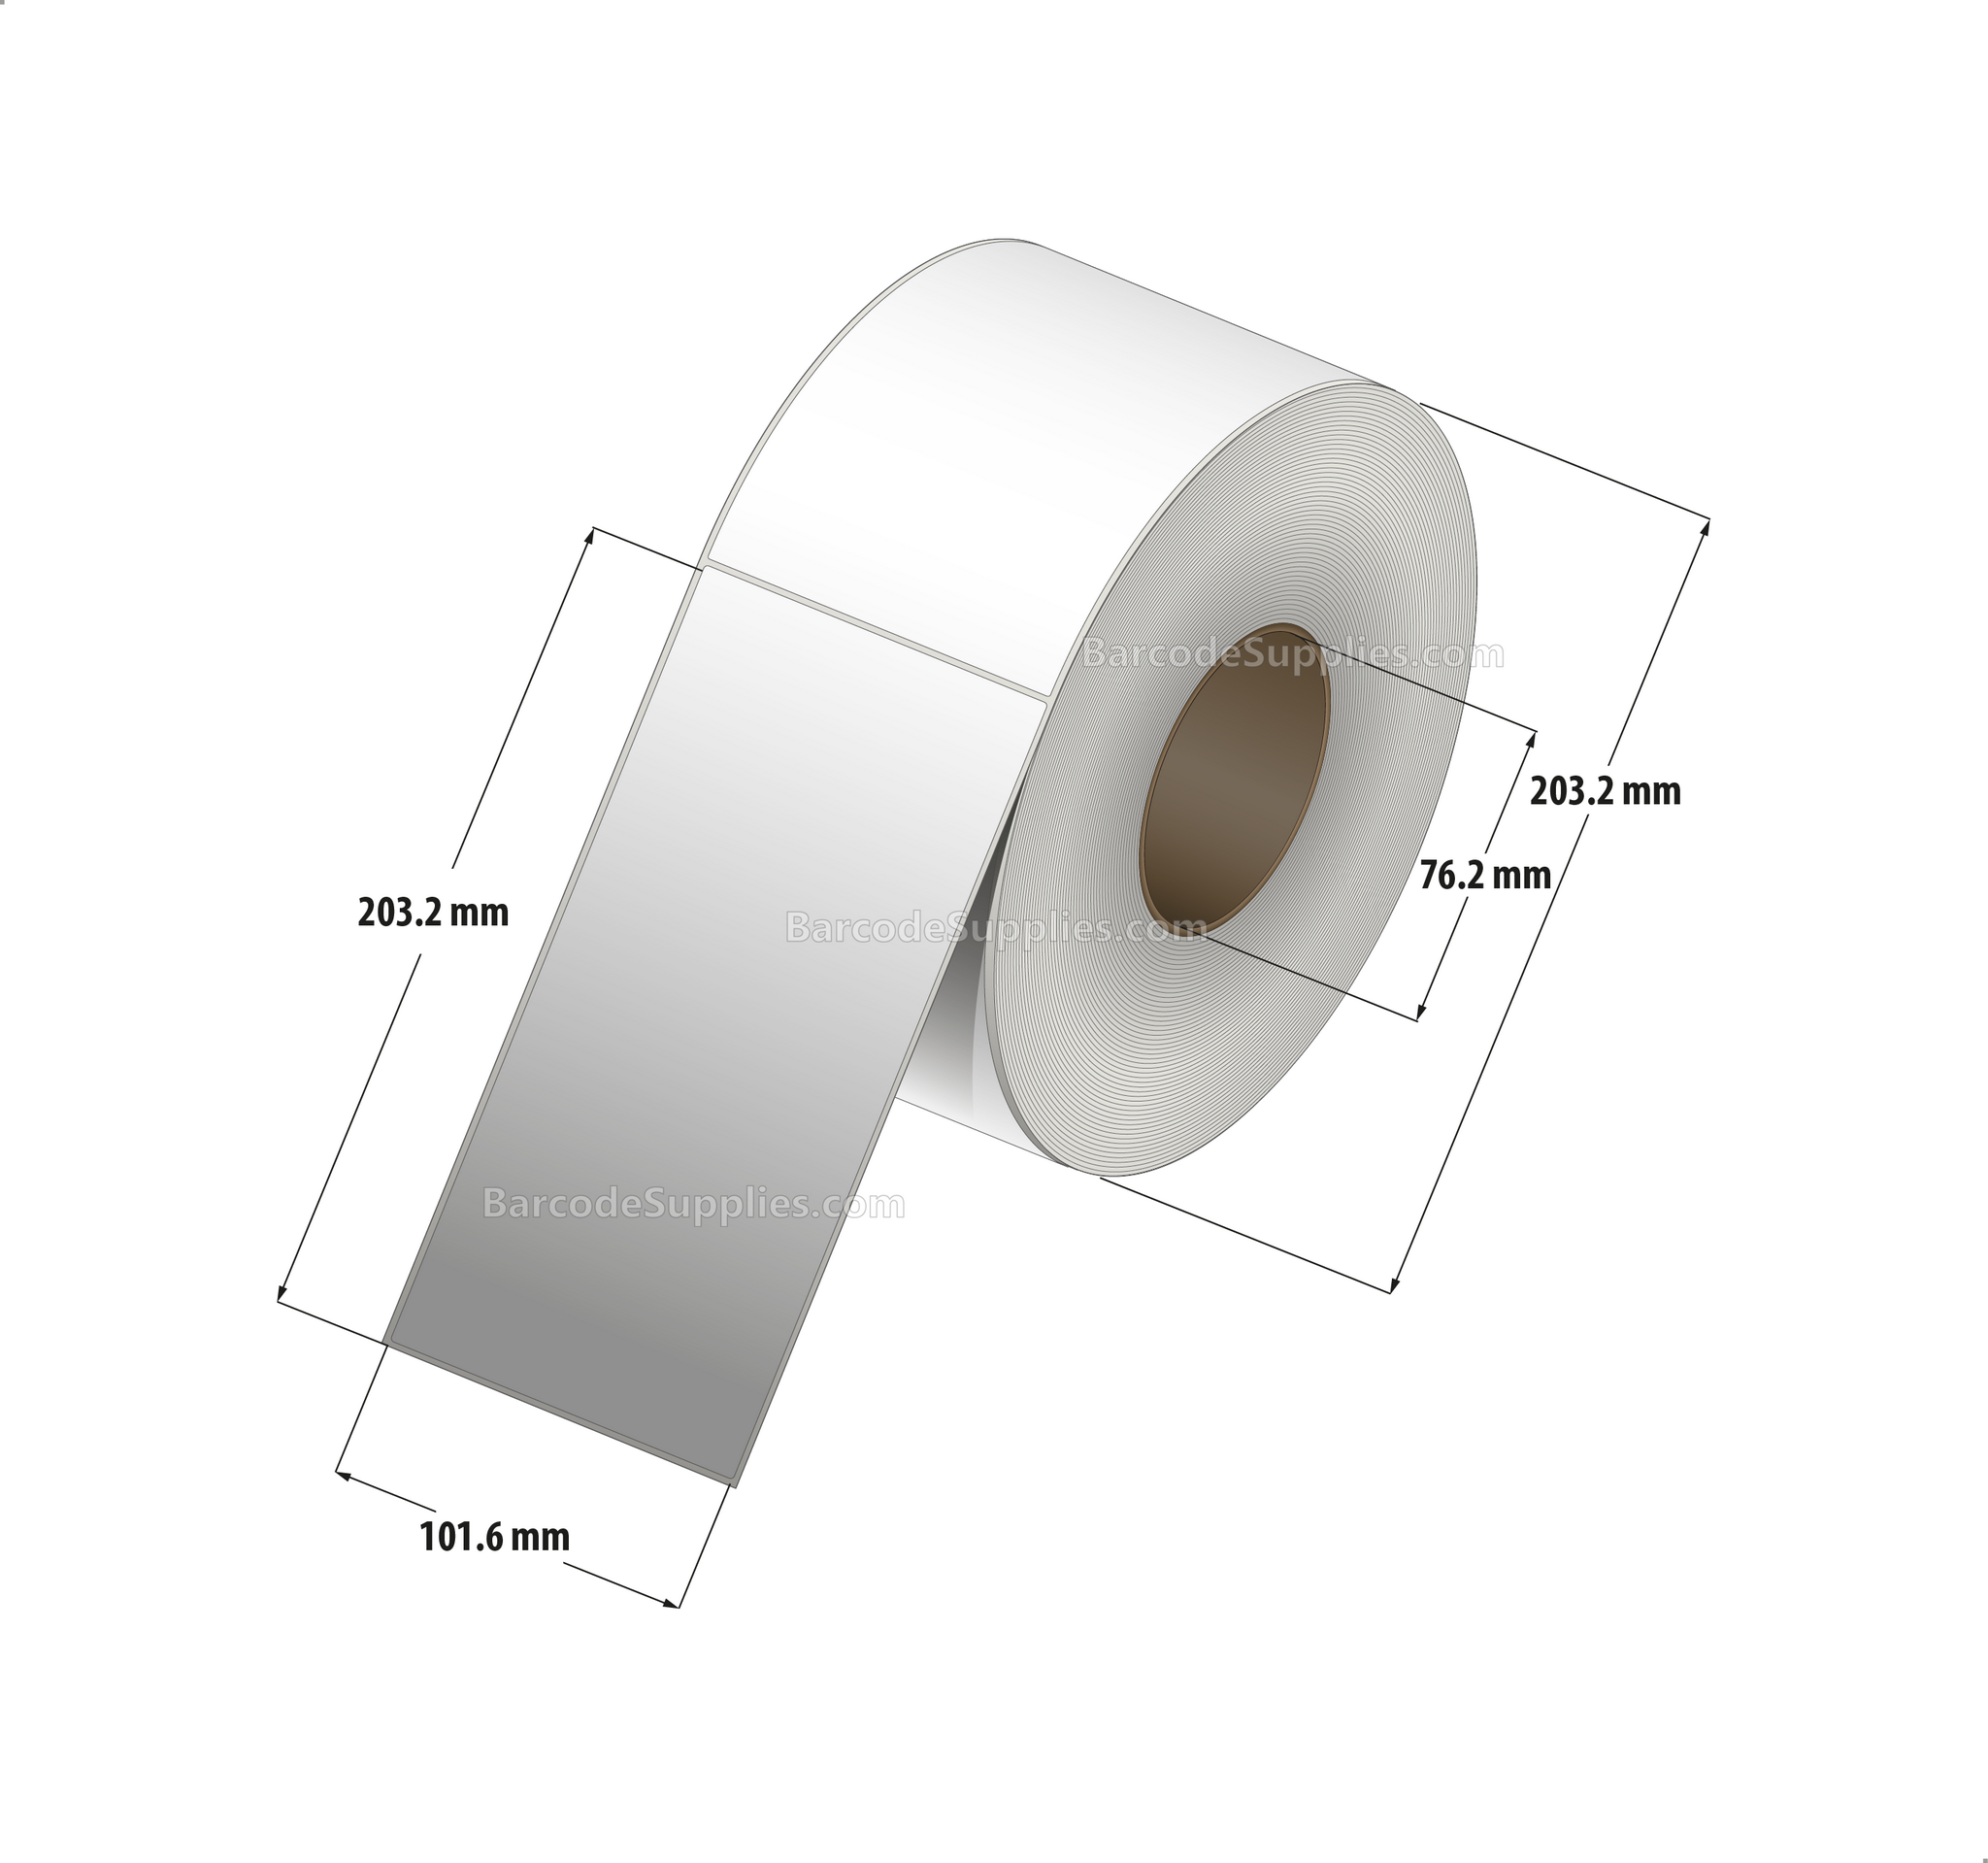 4 x 8 Thermal Transfer White Labels With Permanent Acrylic Adhesive - Not Perforated - 750 Labels Per Roll - Carton Of 4 Rolls - 3000 Labels Total - MPN: TH48-1